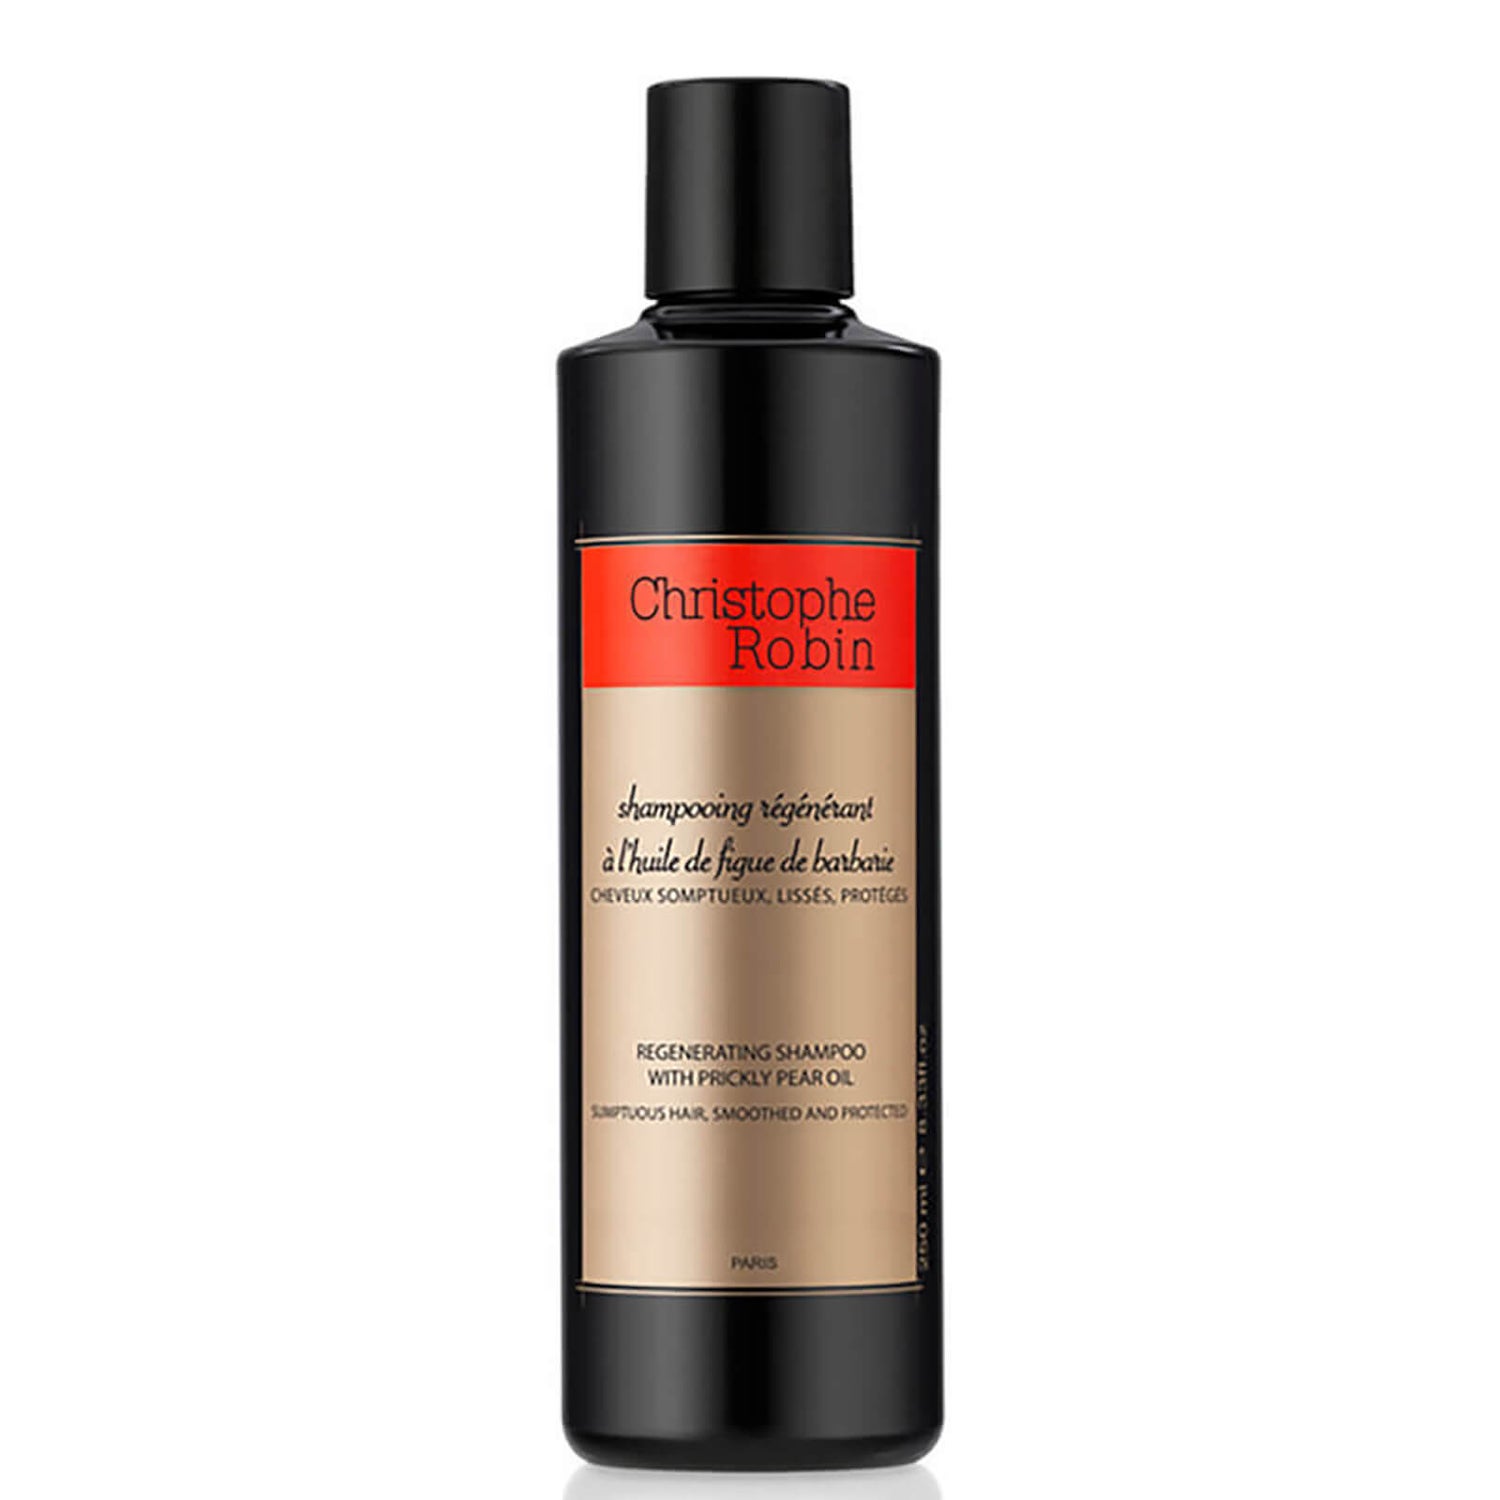 Christophe Robin Regenerating Shampoo with Prickly Pear Oil (250 ml)